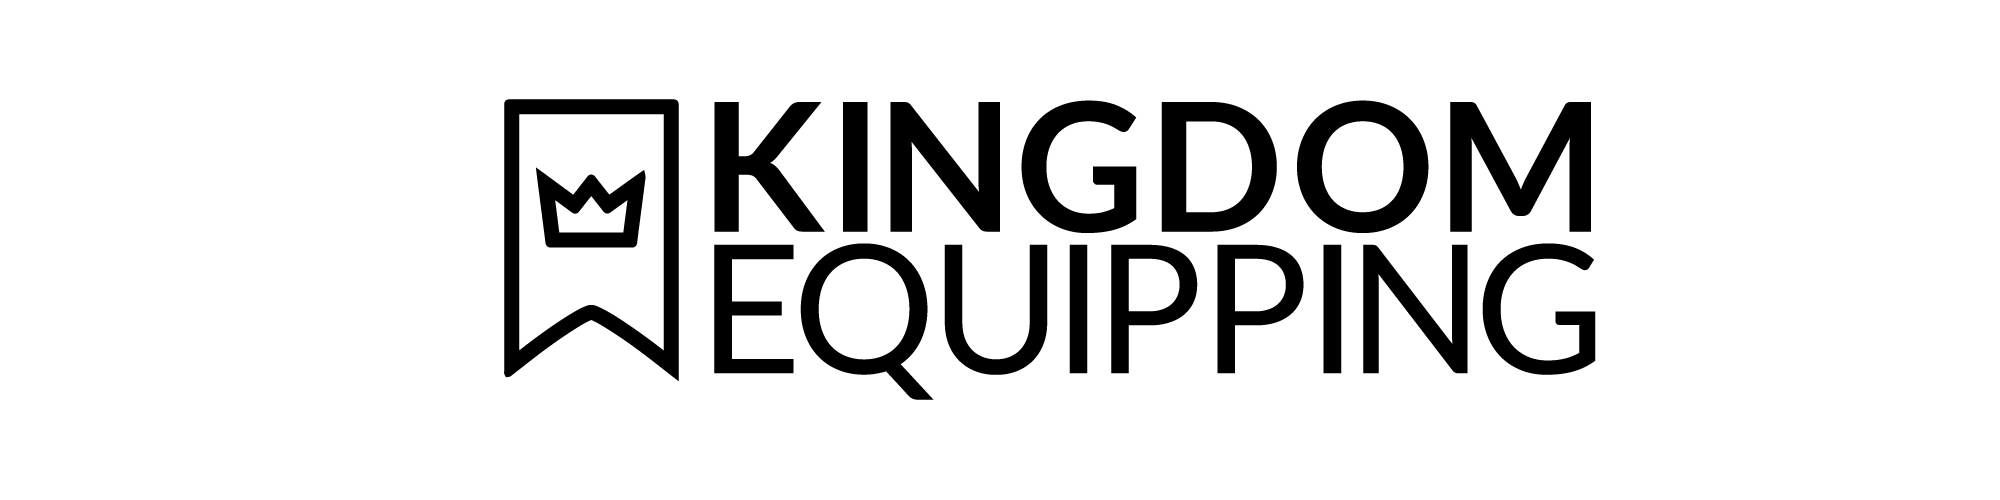 Power and Identity Session 2 | Kingdom Equipping